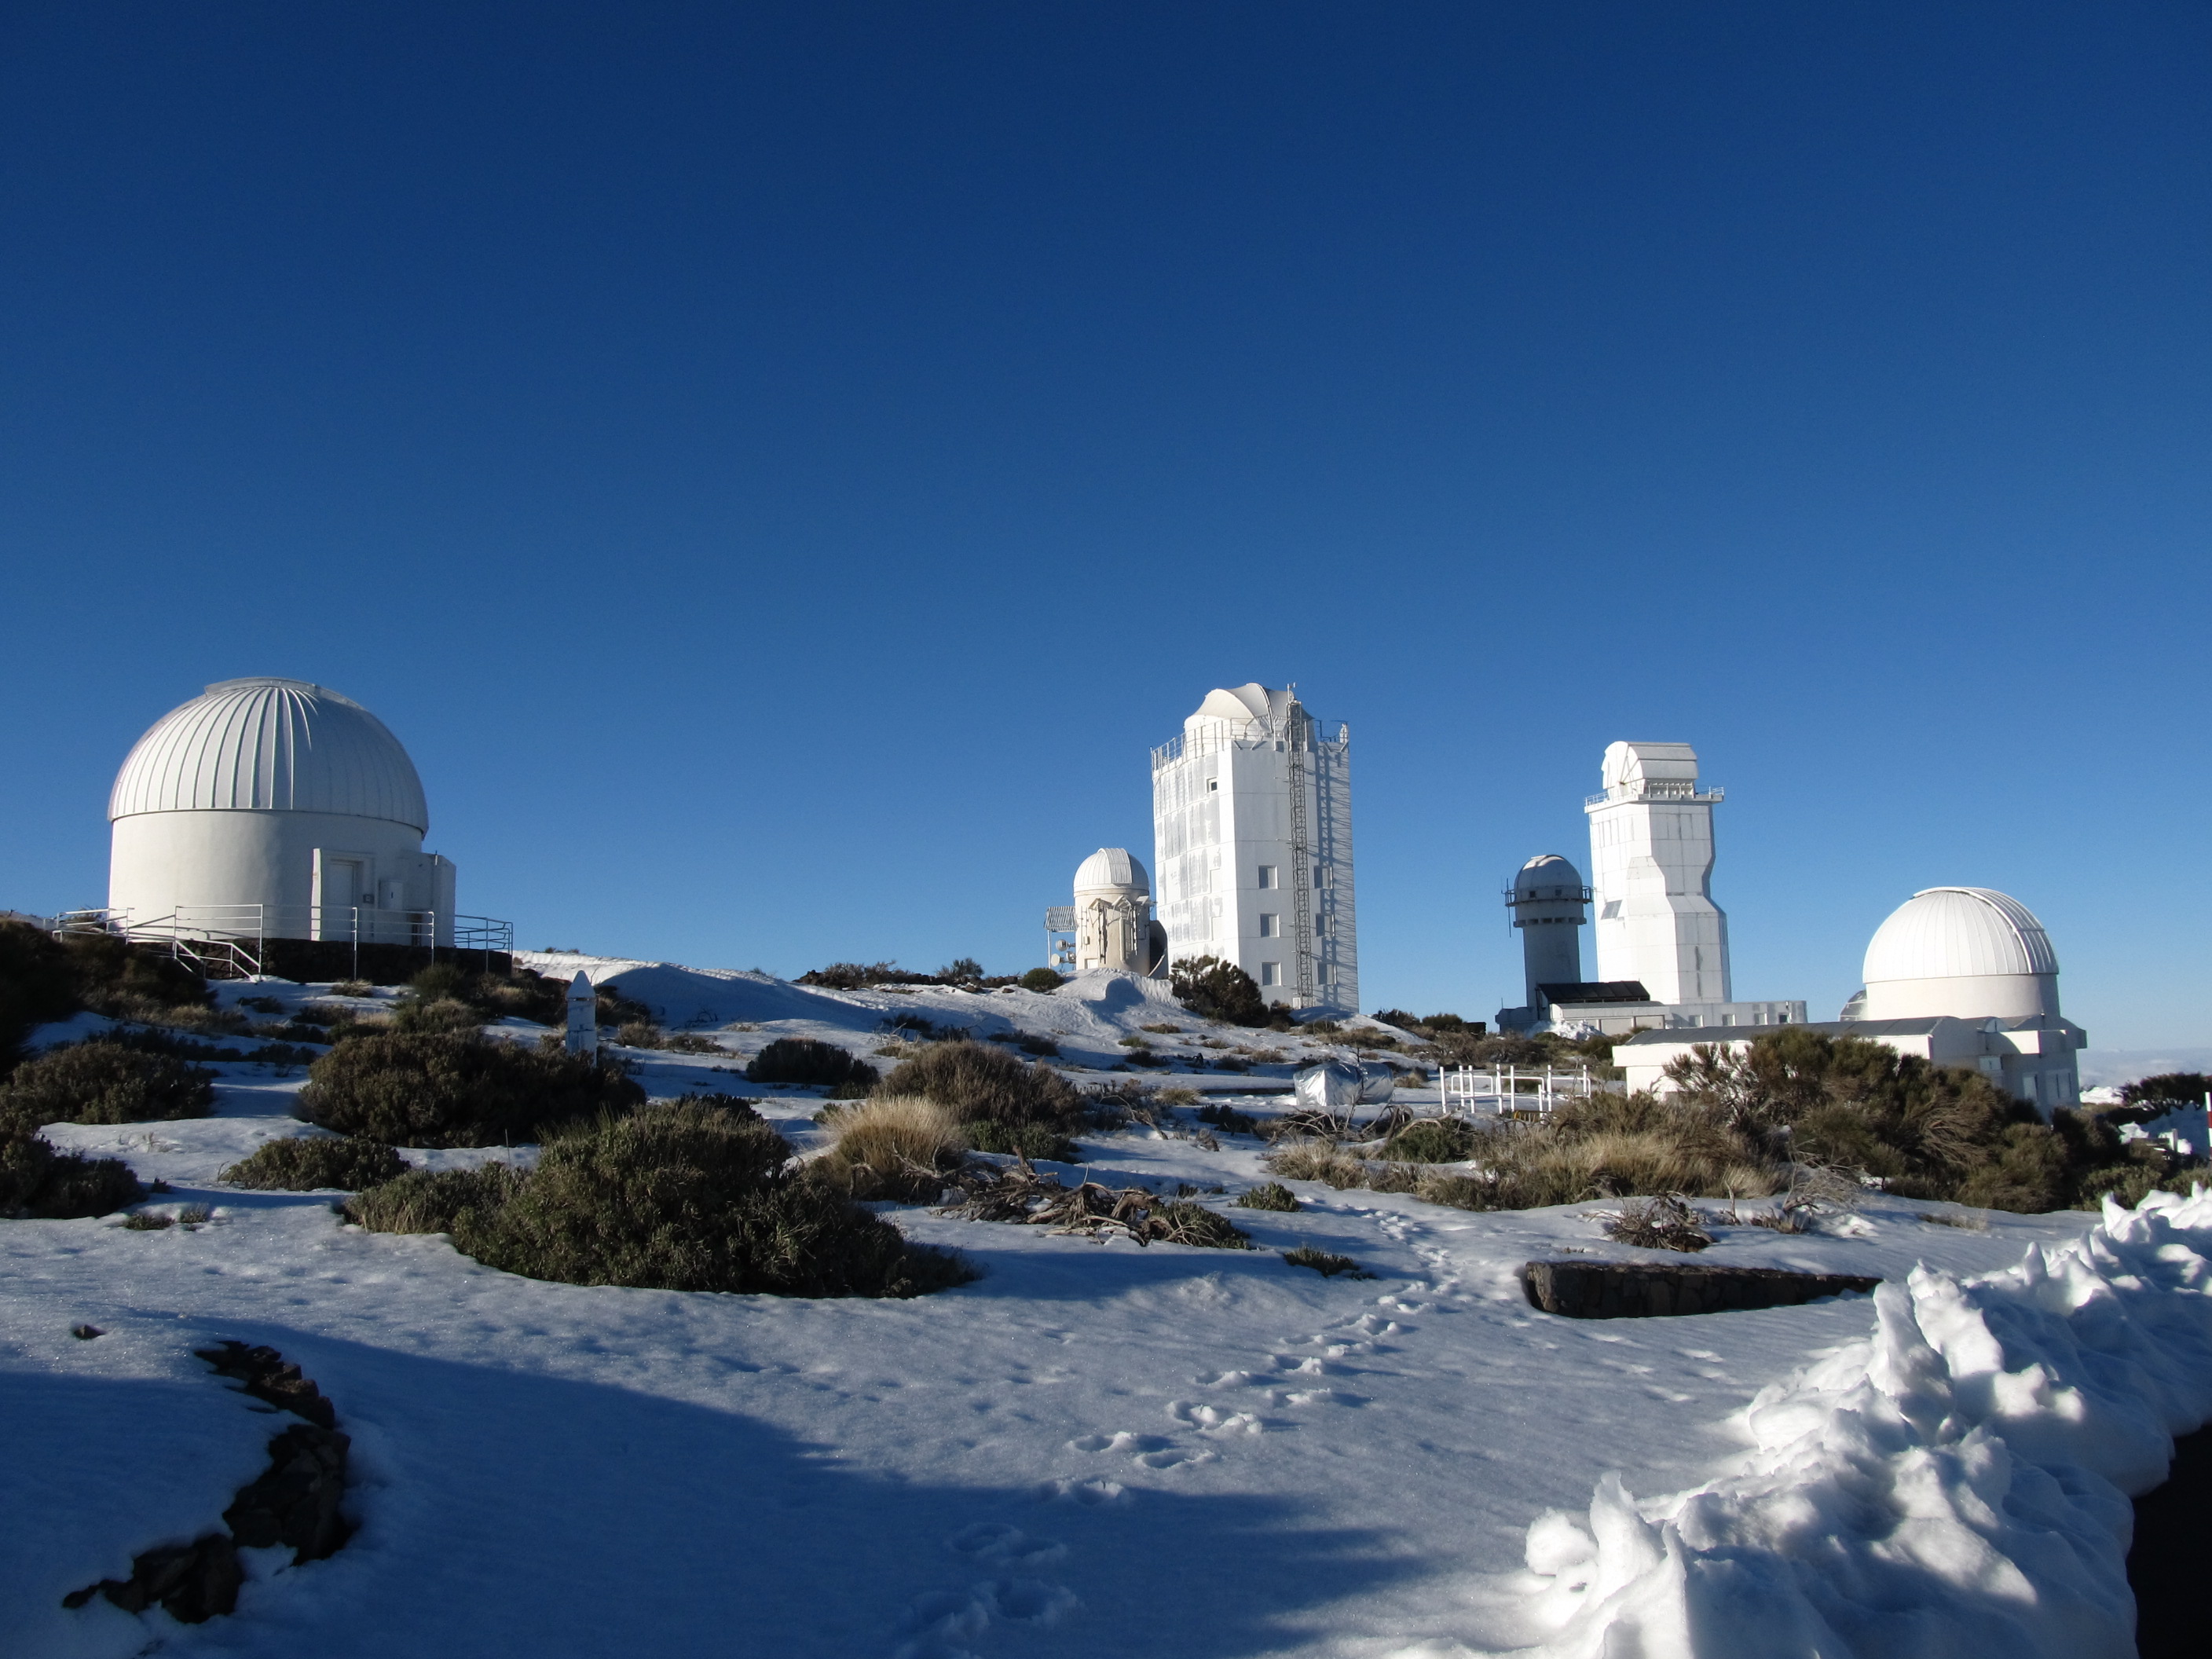 The Teide Observatory, THEMIS solar telescopes and QUIJOTE telescopes